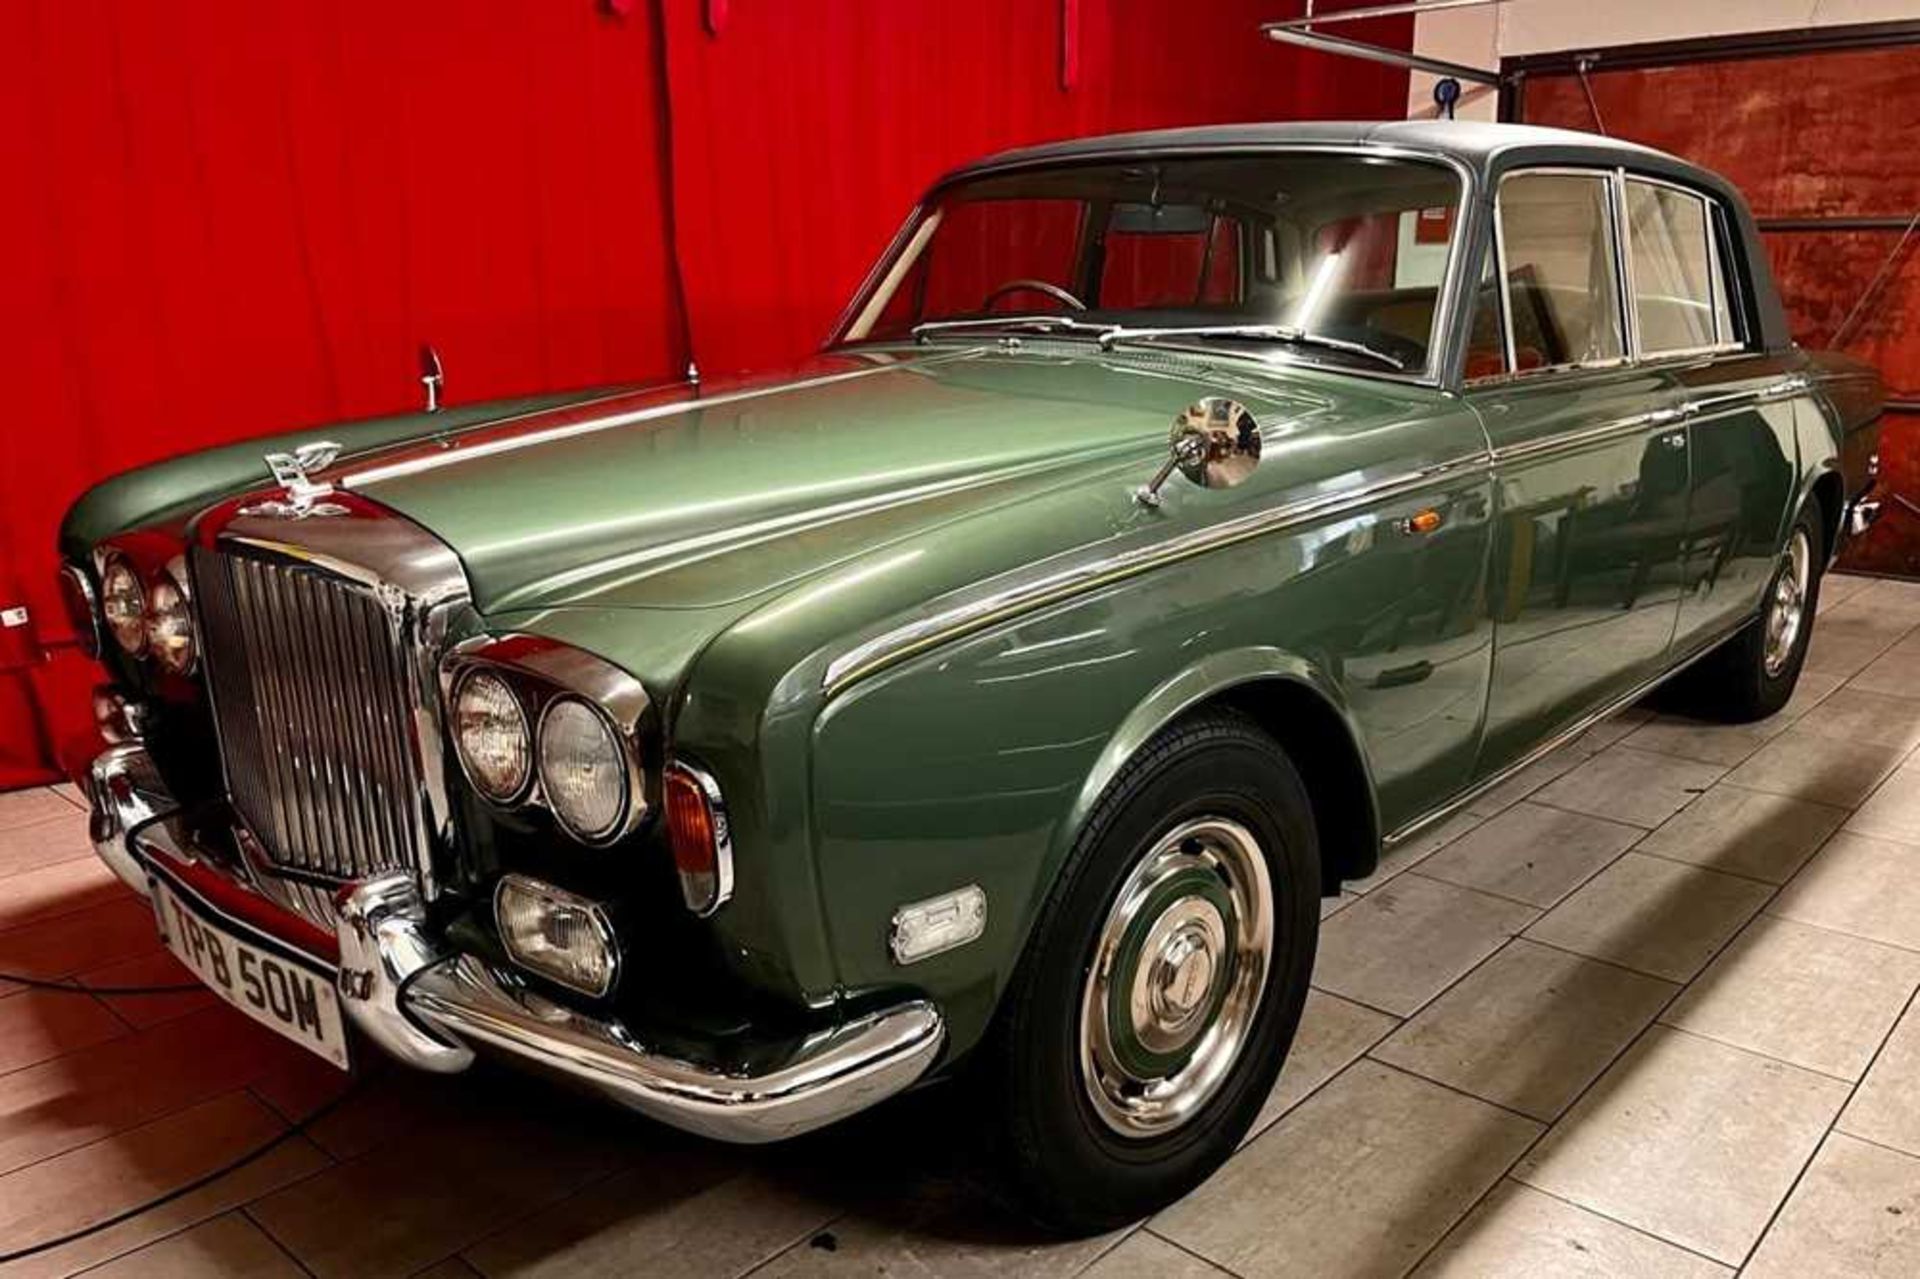 1973 Bentley T-Series Saloon Formerly part of the Dr James Hull and Jaguar Land Rover collections - Image 5 of 22